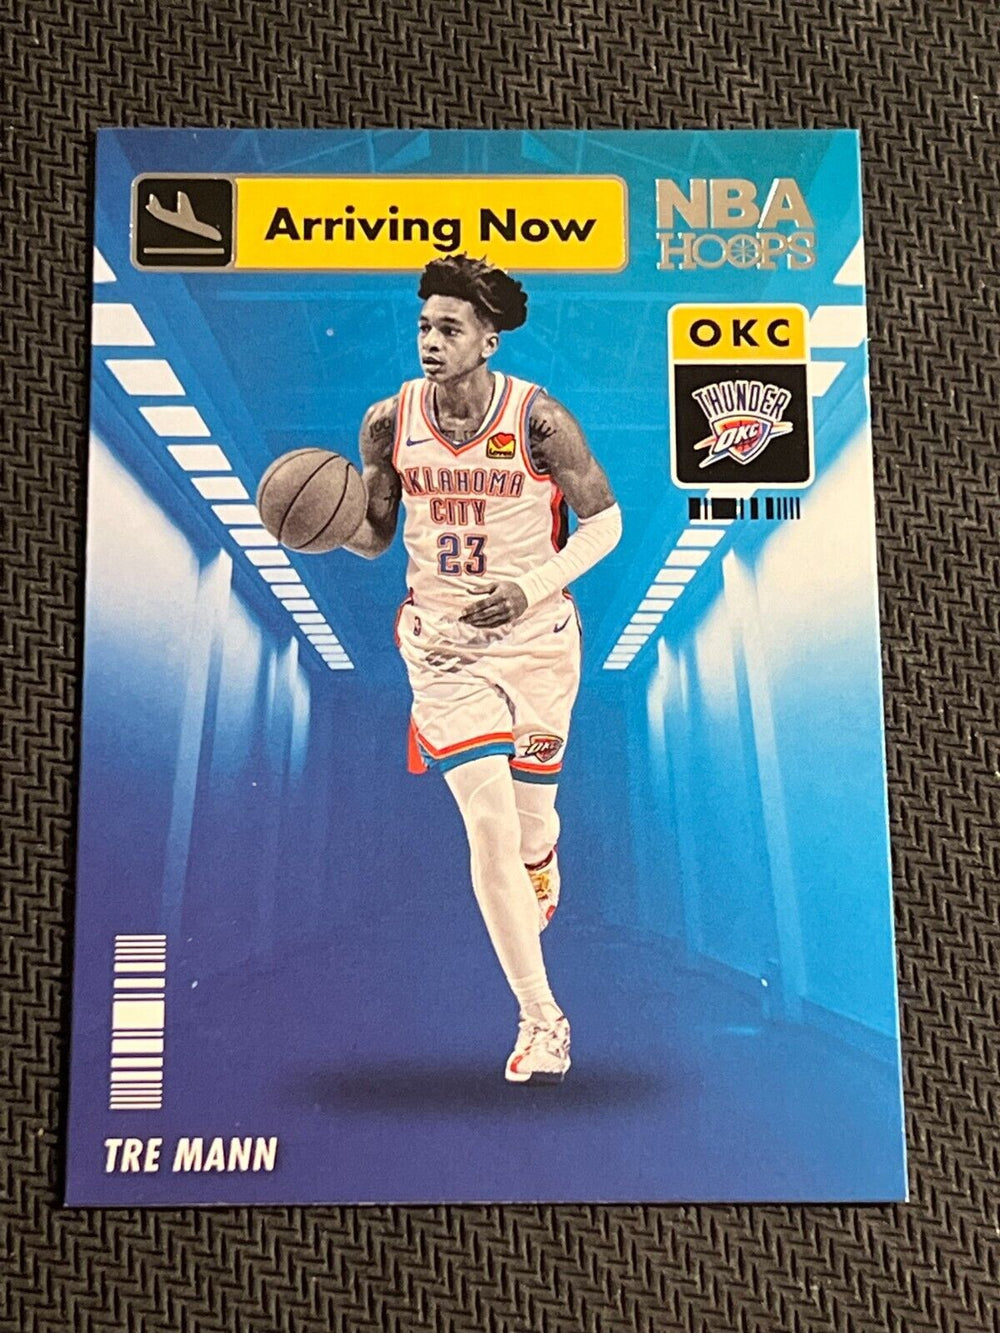 Tre Mann 2021 2022 Panini Hoops Arriving Now Series Mint Rookie Card #22